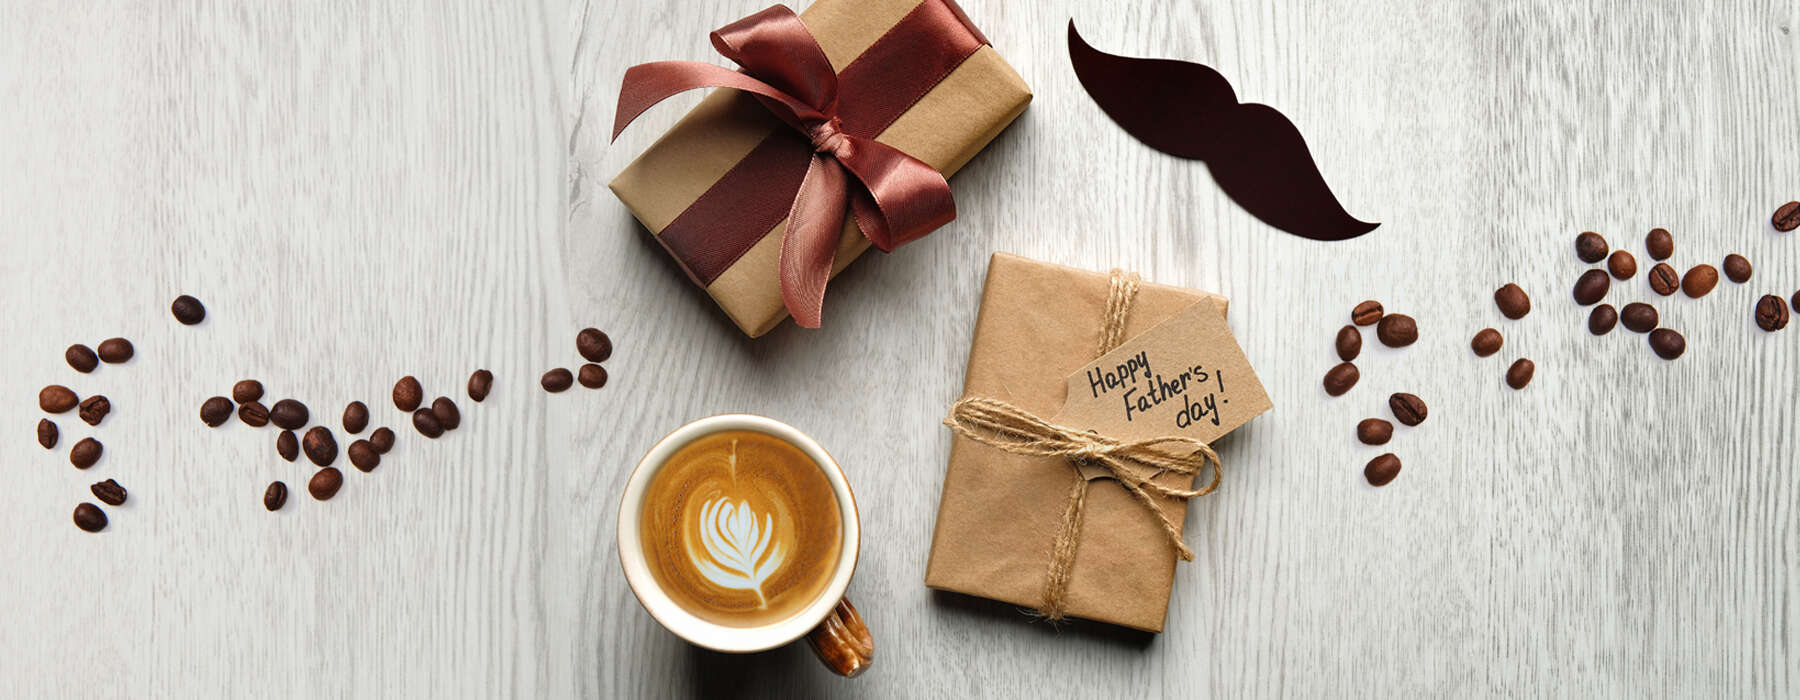 Father’s Day Gift Guide: Best Home Coffee Presents for Dad, by EspressoWorks 